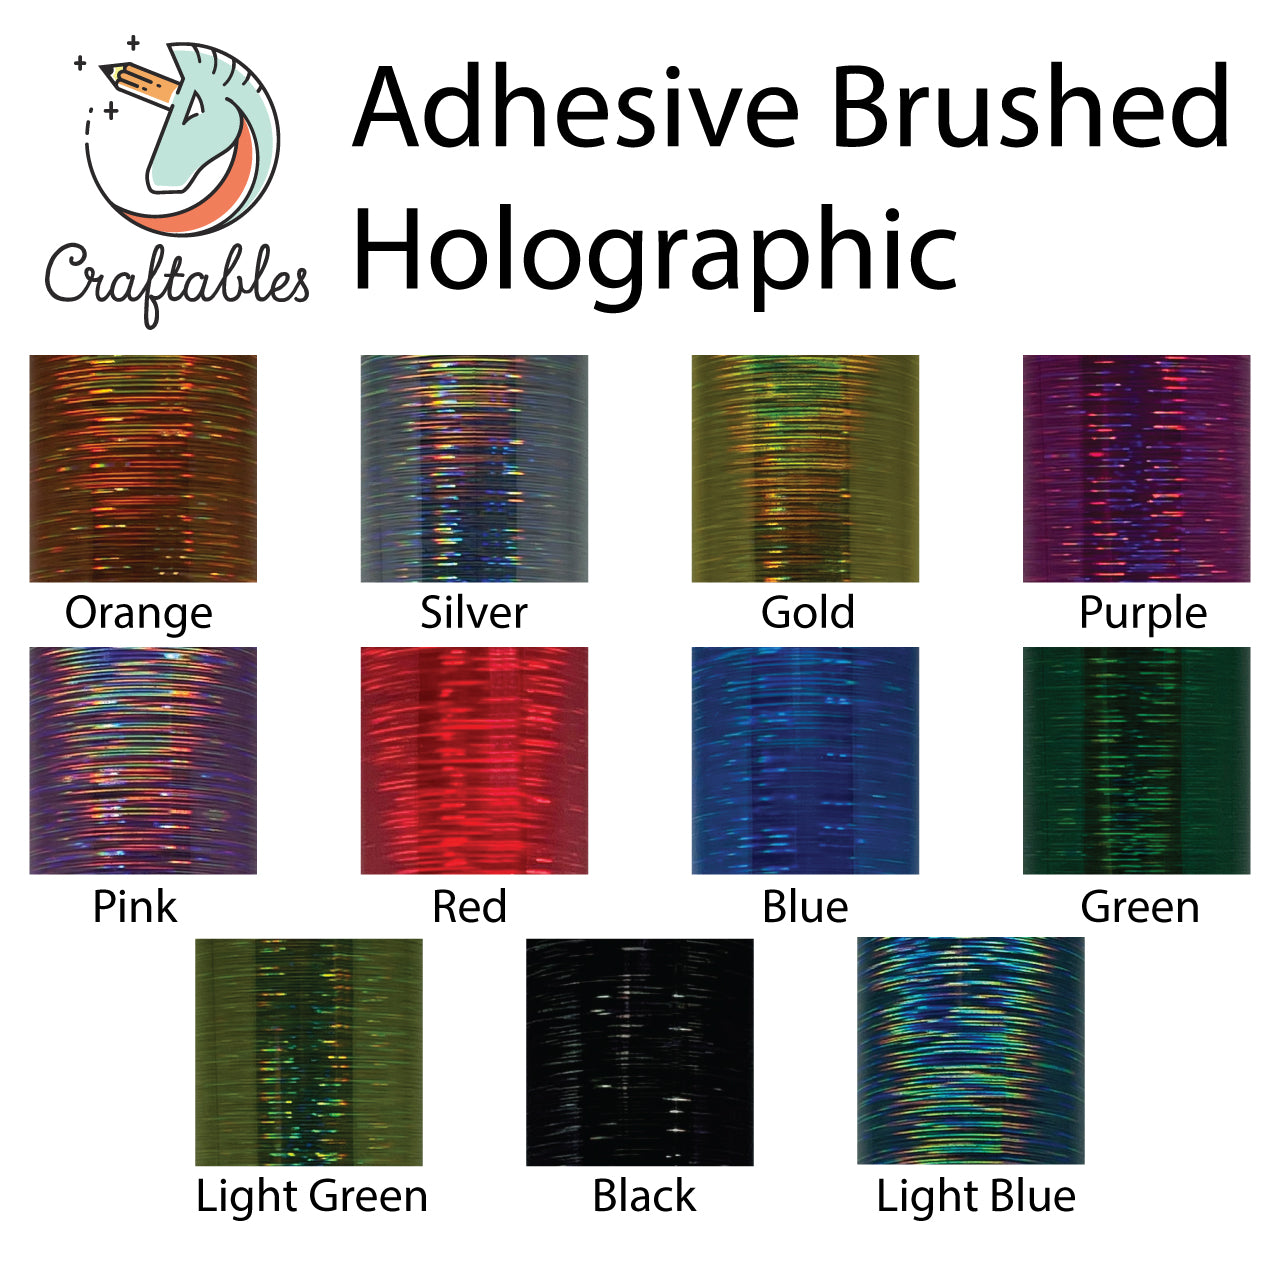 Red Brushed Holographic Adhesive Vinyl Sheets By Craftables